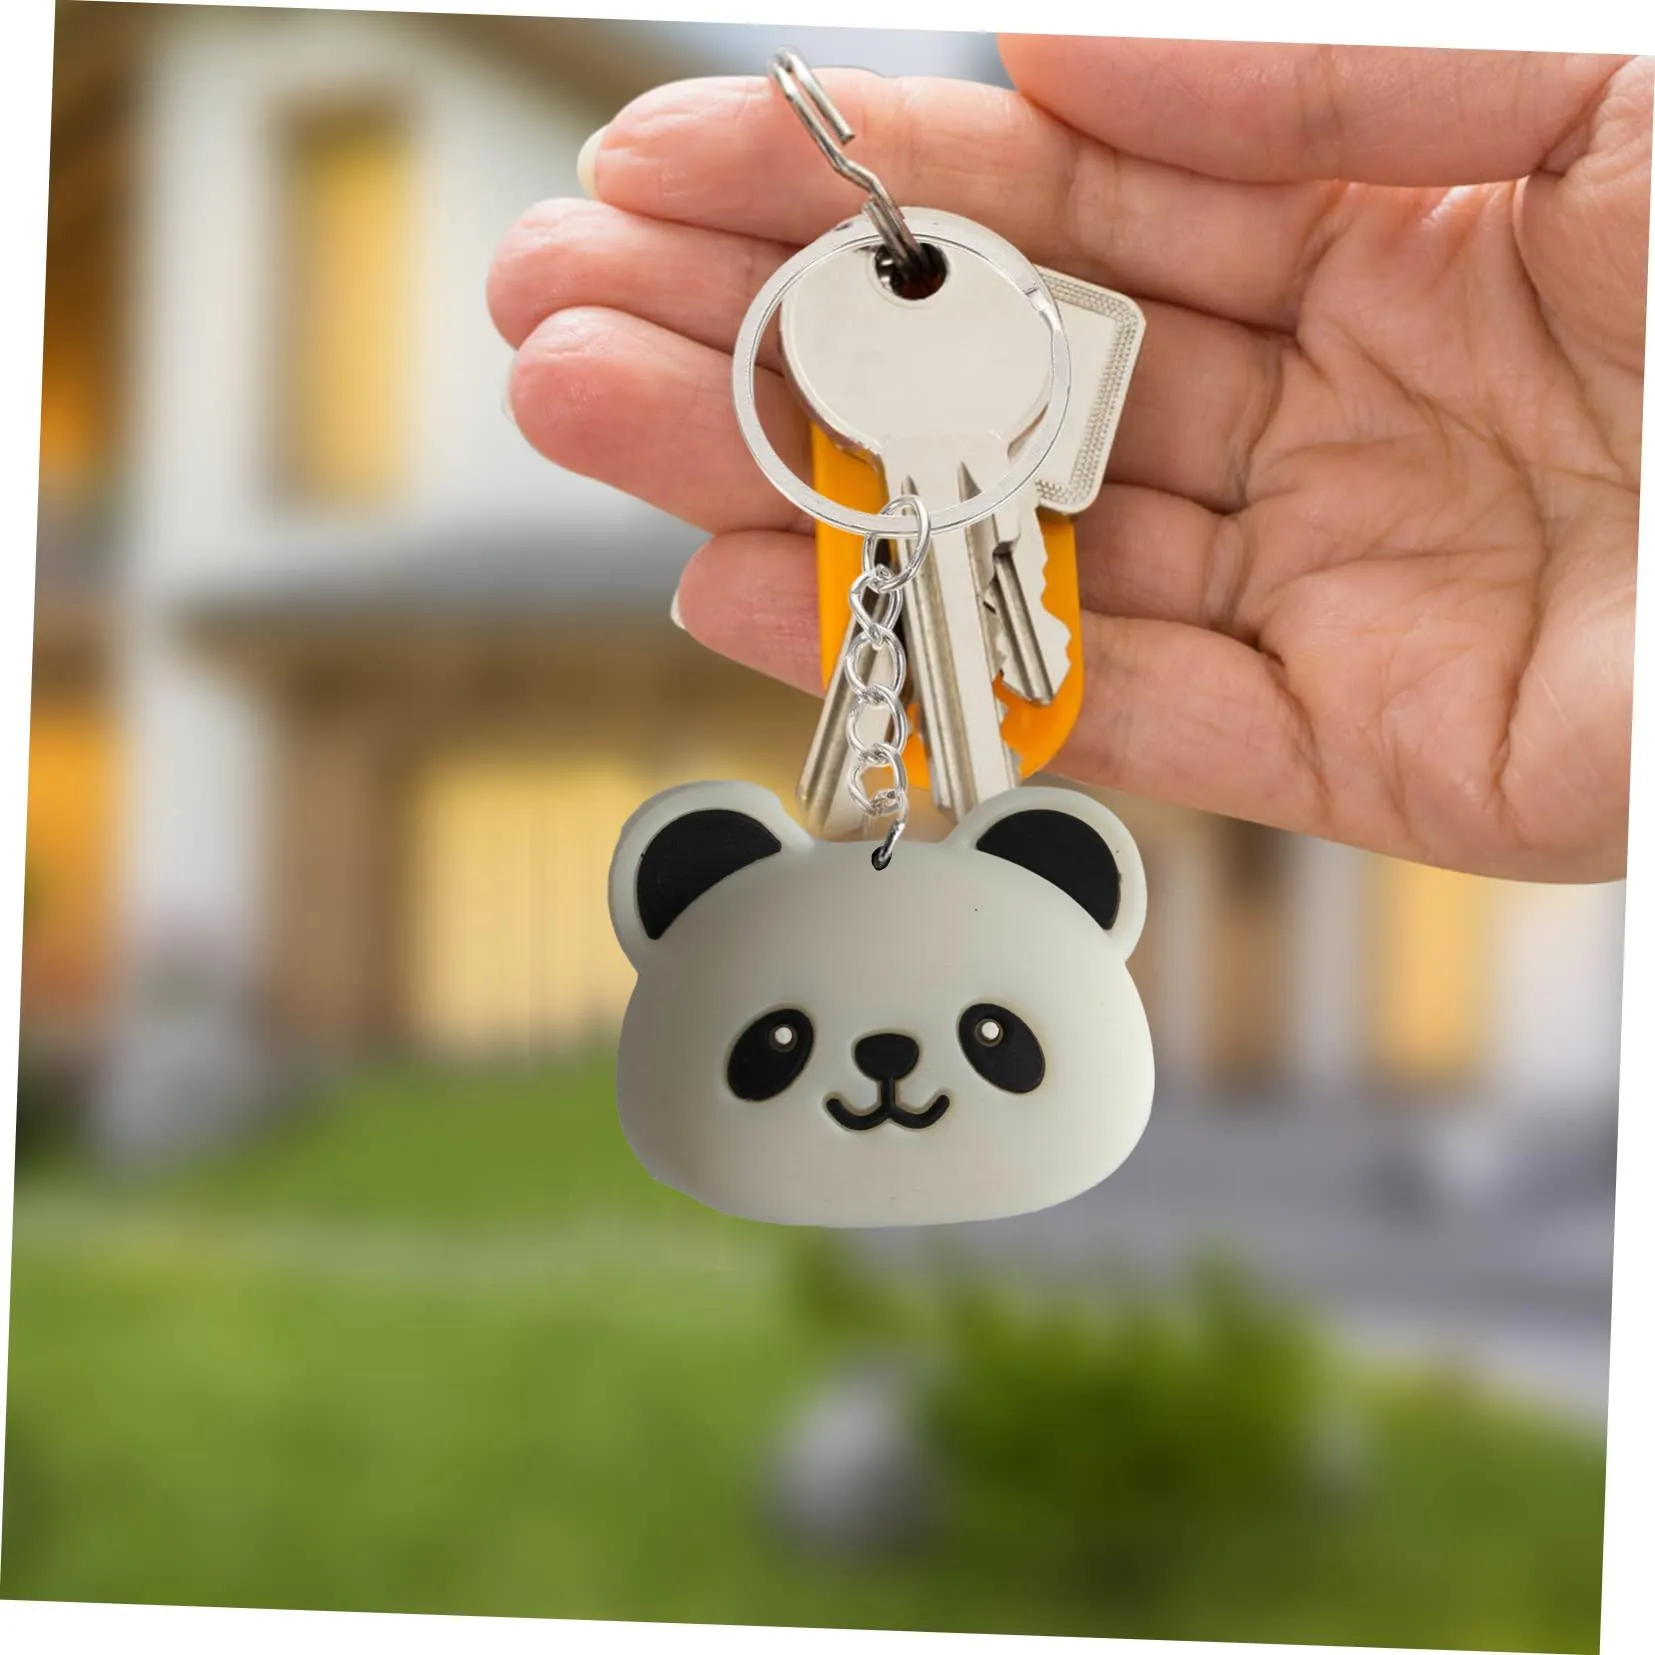 panda 12 keychain car bag keyring for kids party favors backpack shoulder pendant accessories charm suitable schoolbag key rings tags goodie stuffer christmas gifts bags